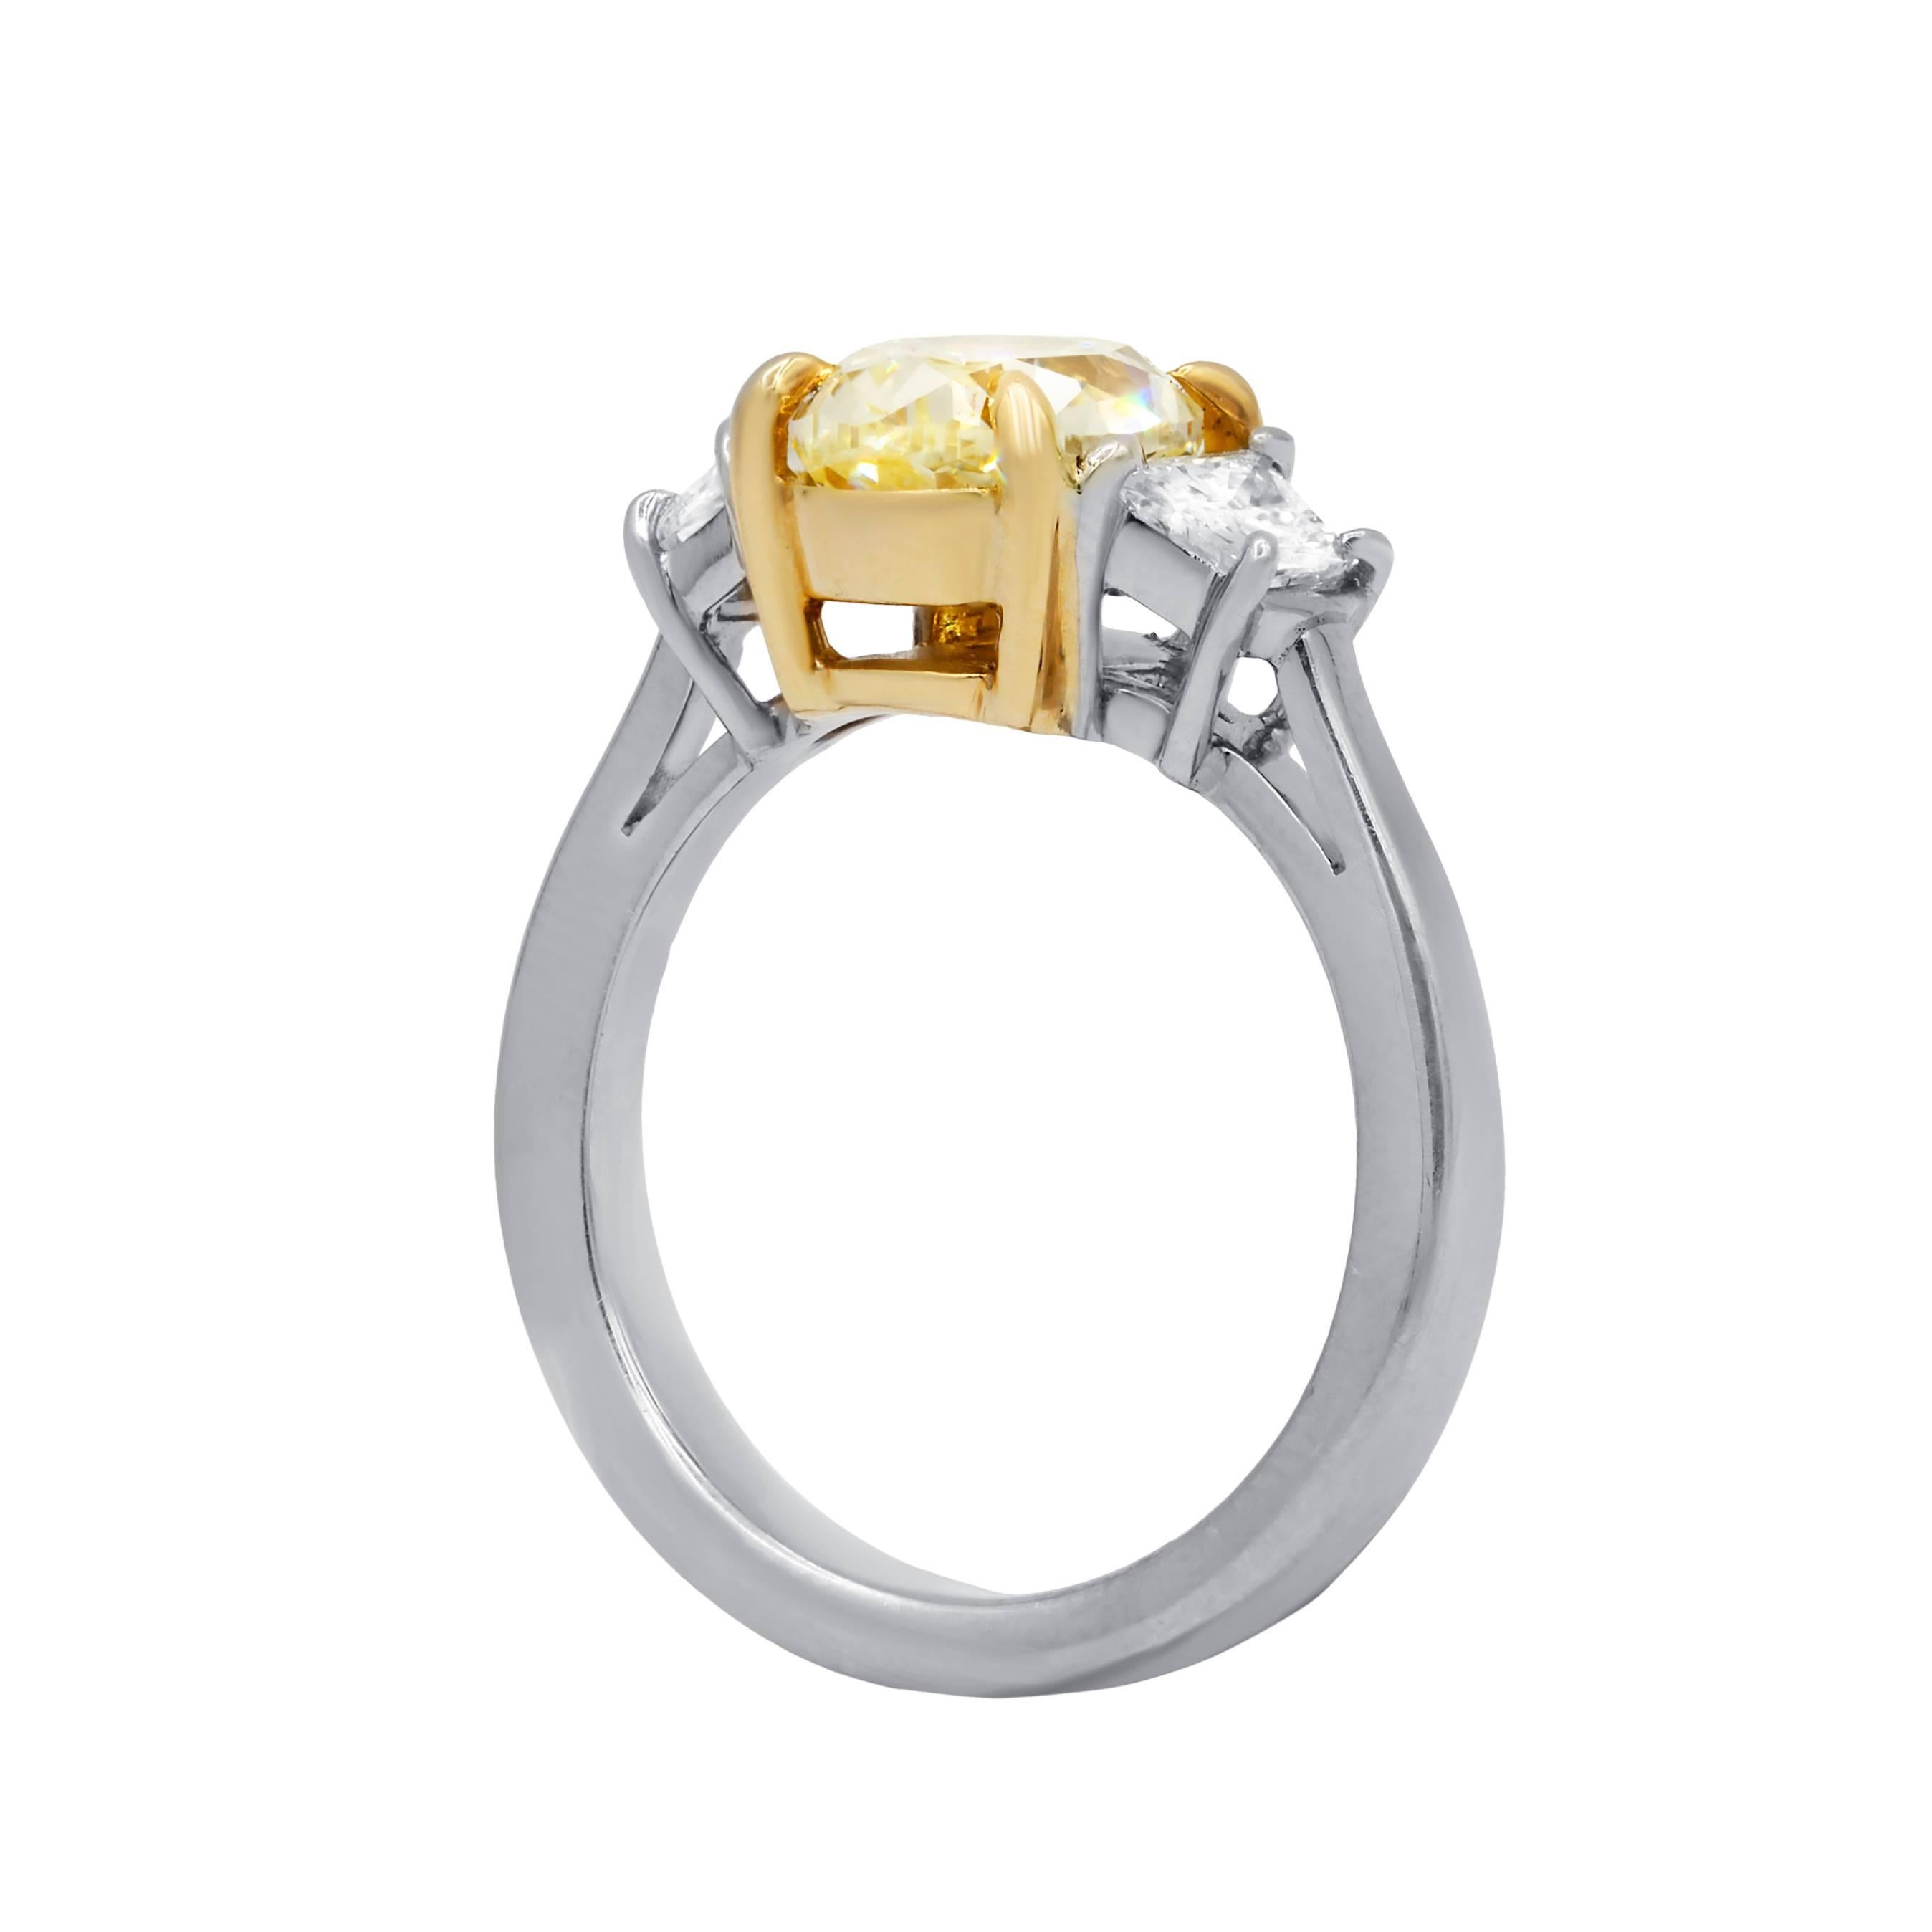 Beautiful designed diamond engagement ring in platinum mounting.The center GIA certified diamond features natural fancy yellow 2.58 cts oval modified brilliant cut diamond,VS1 clarity and accented by additional  0.75 cts white natural diamonds on